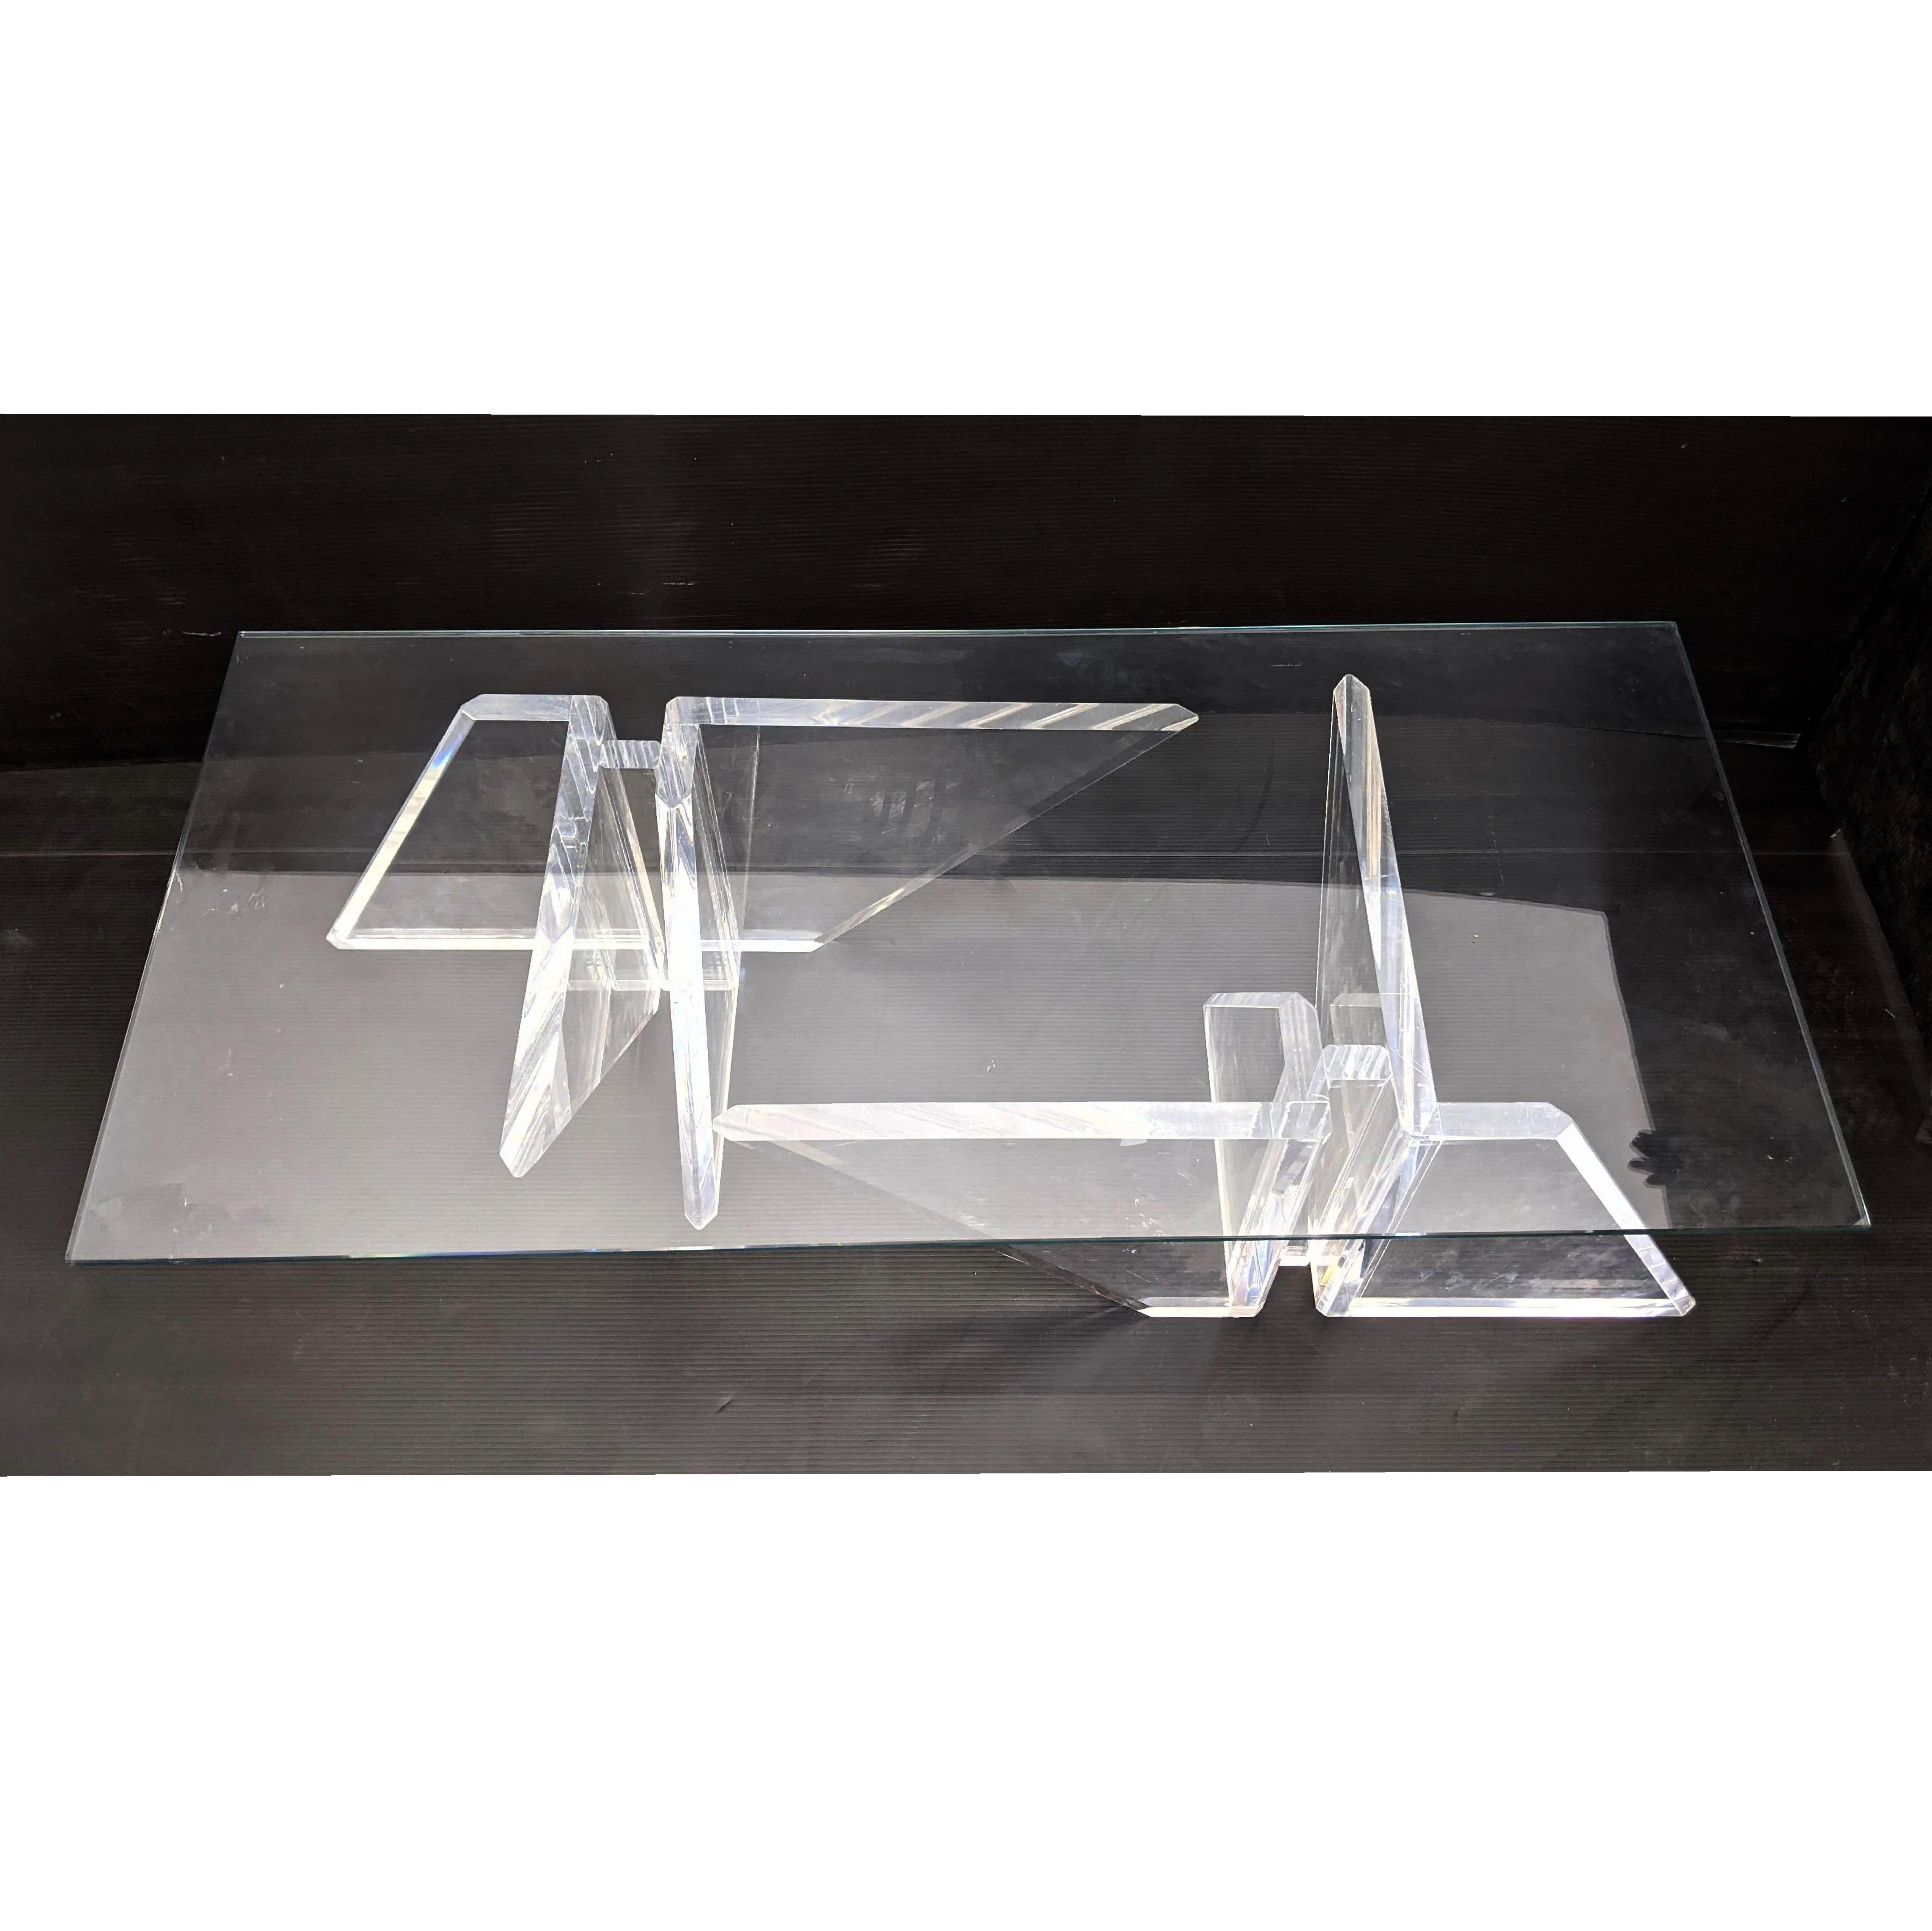 Mid-Century Modern Minimal Prismatic, Substantial Lucite Glass Coffee Table 1970s Sculptural Modern